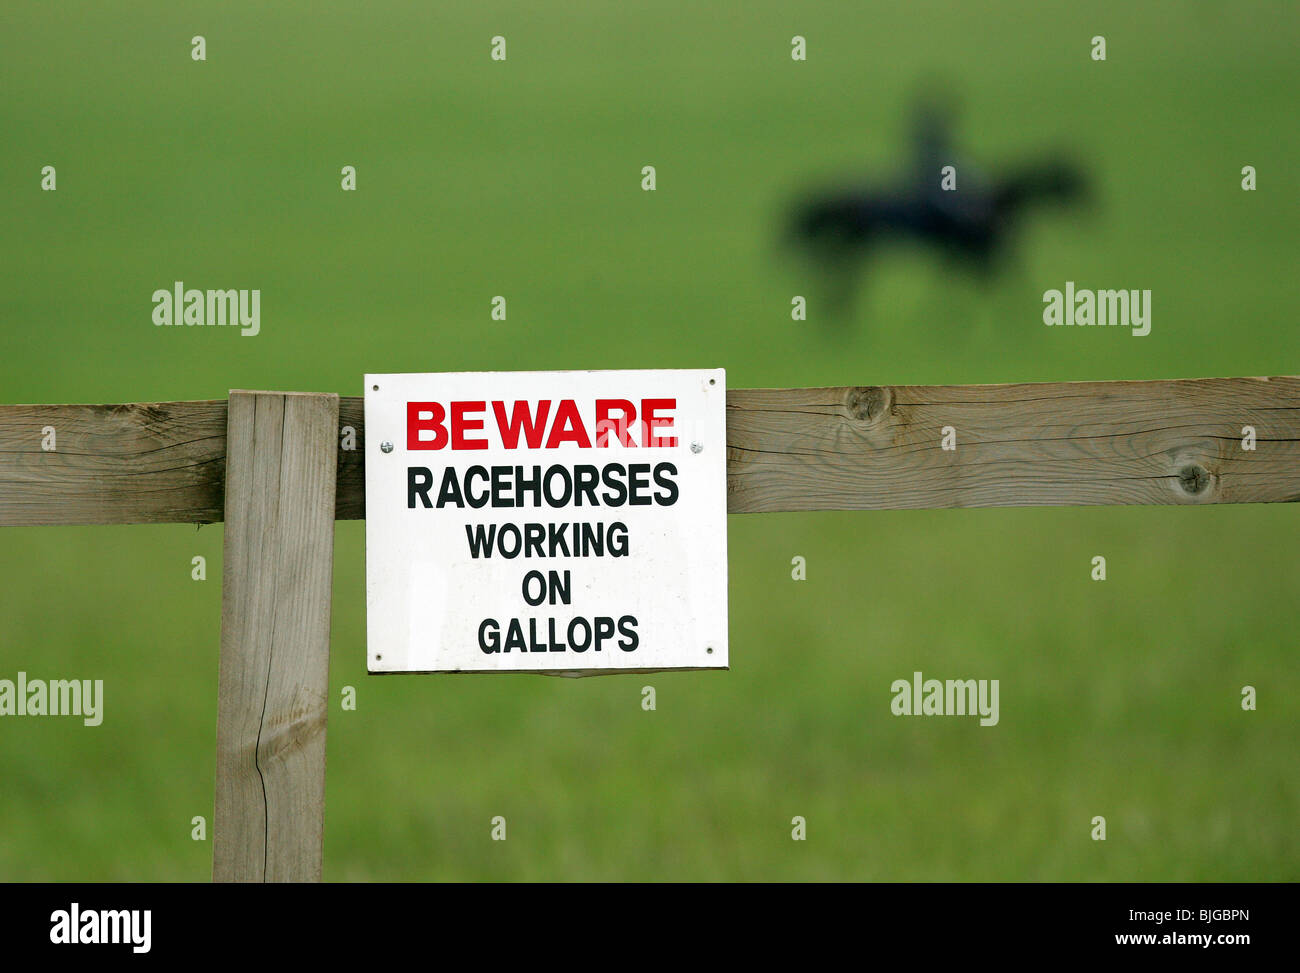 Beware Racehorses working on gallops sign, Newmarket, Great Britain Stock Photo